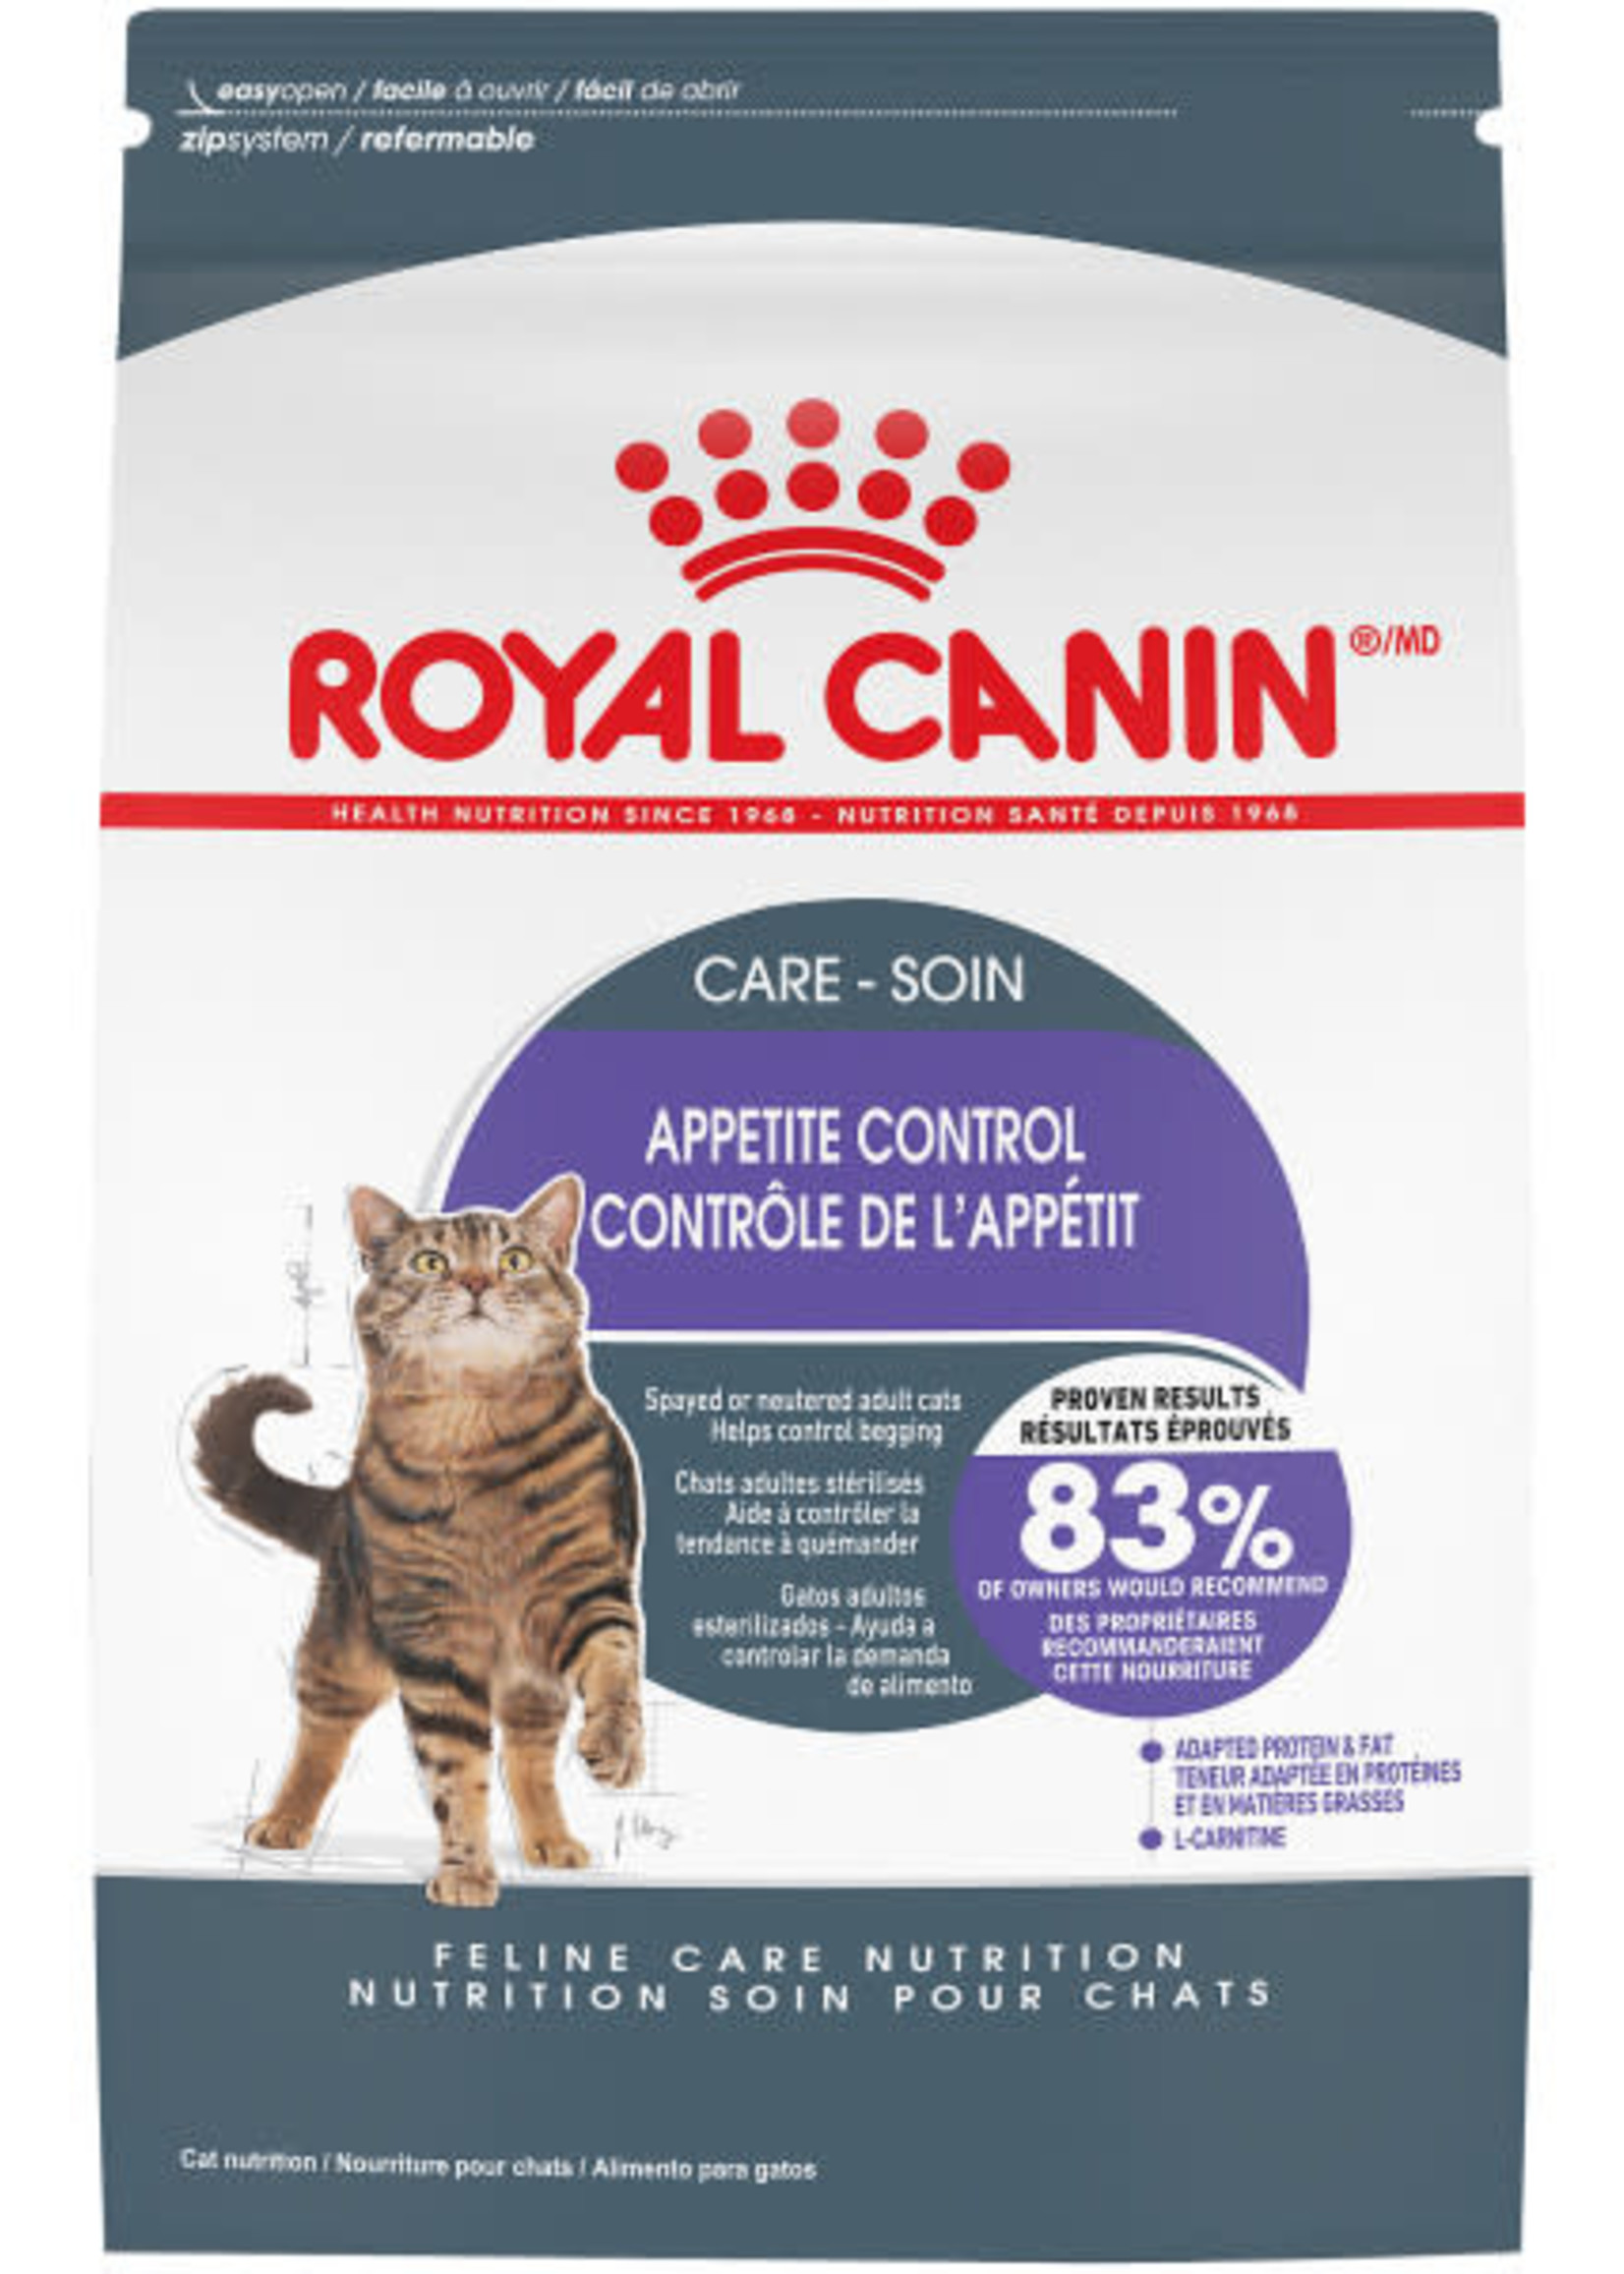 Royal Canin® Royal Canin Cat Appetite Control Spayed/Neutered 2.5lb